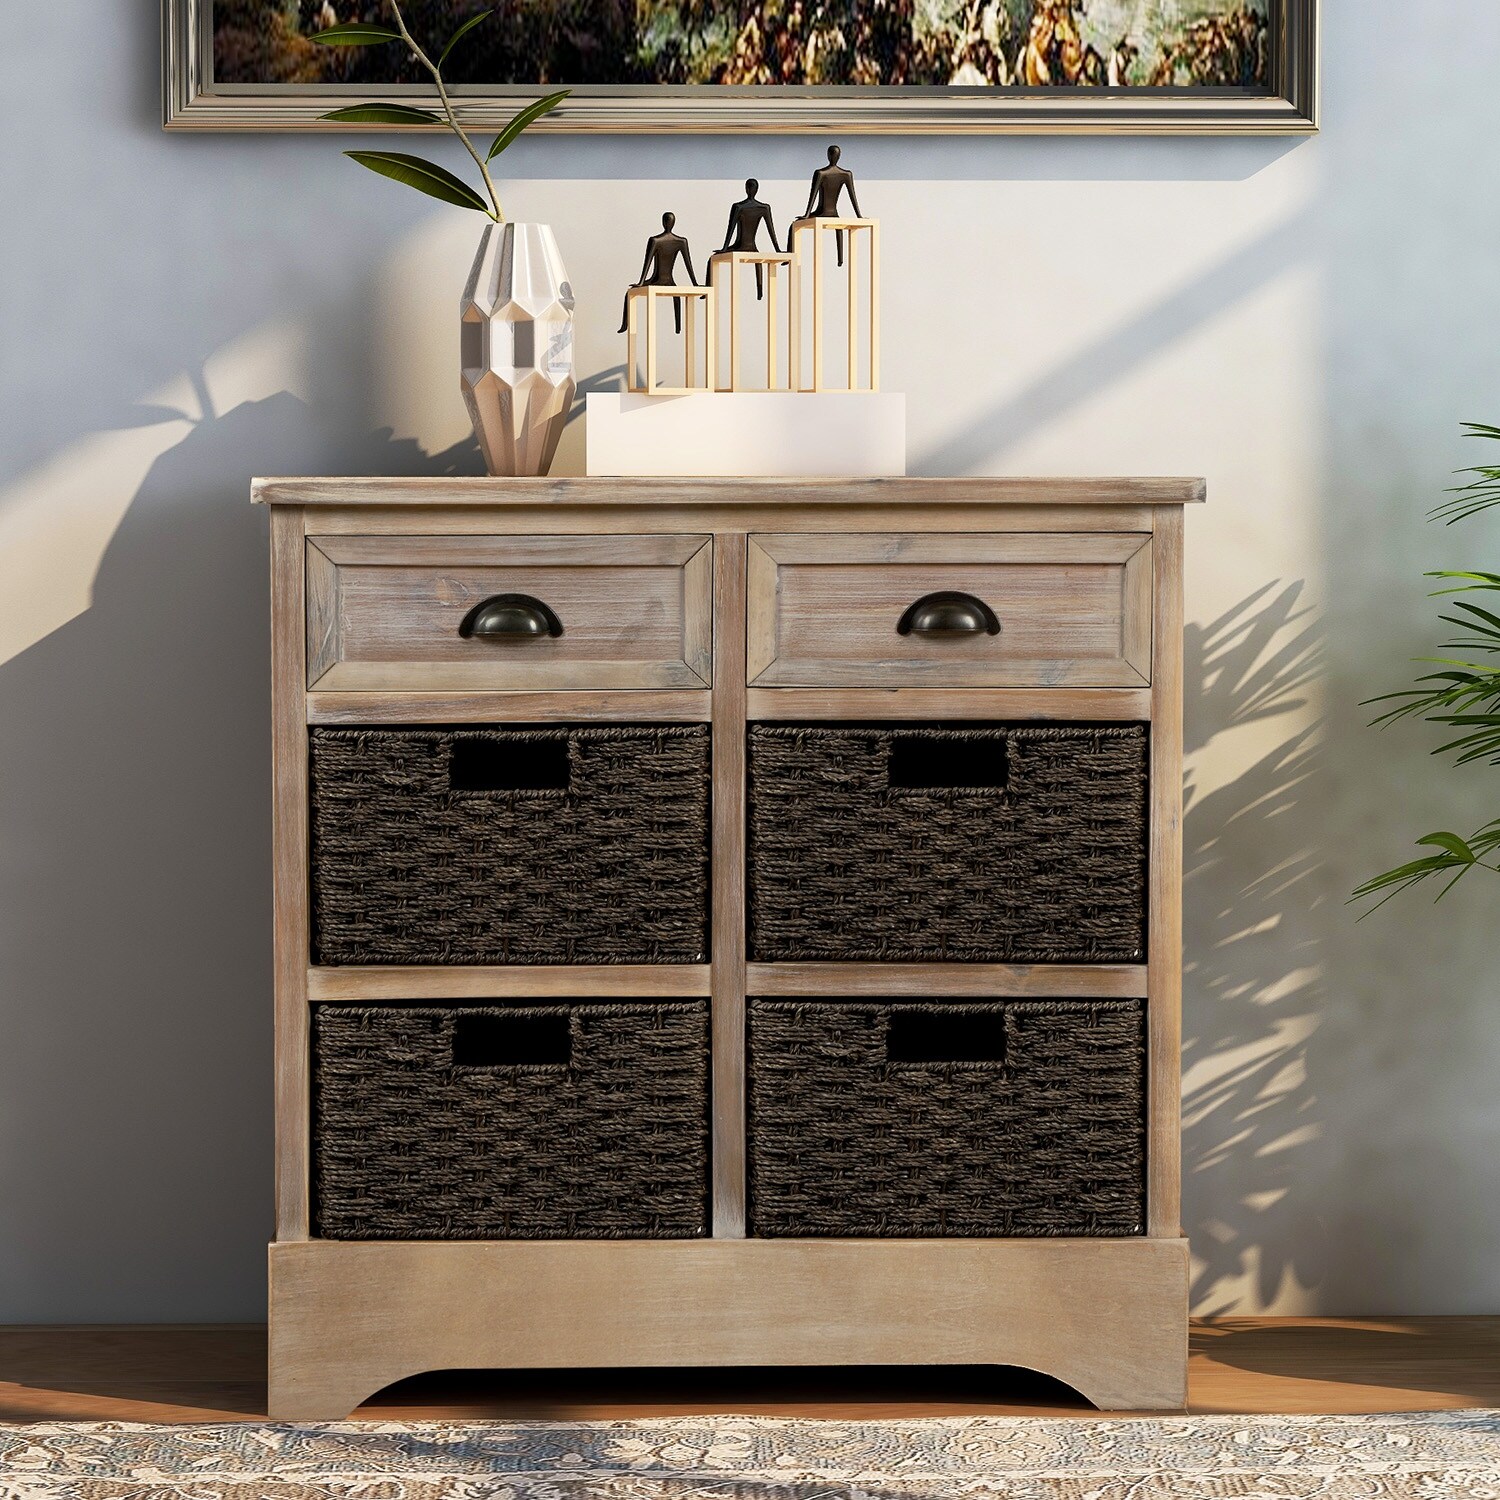 https://ak1.ostkcdn.com/images/products/is/images/direct/13471169e069f4472eeca61b0b9b4d78b77dd24b/Storage-Cabinet-with-Drawers-and-Rattan-Basket-for-Living-Room.jpg